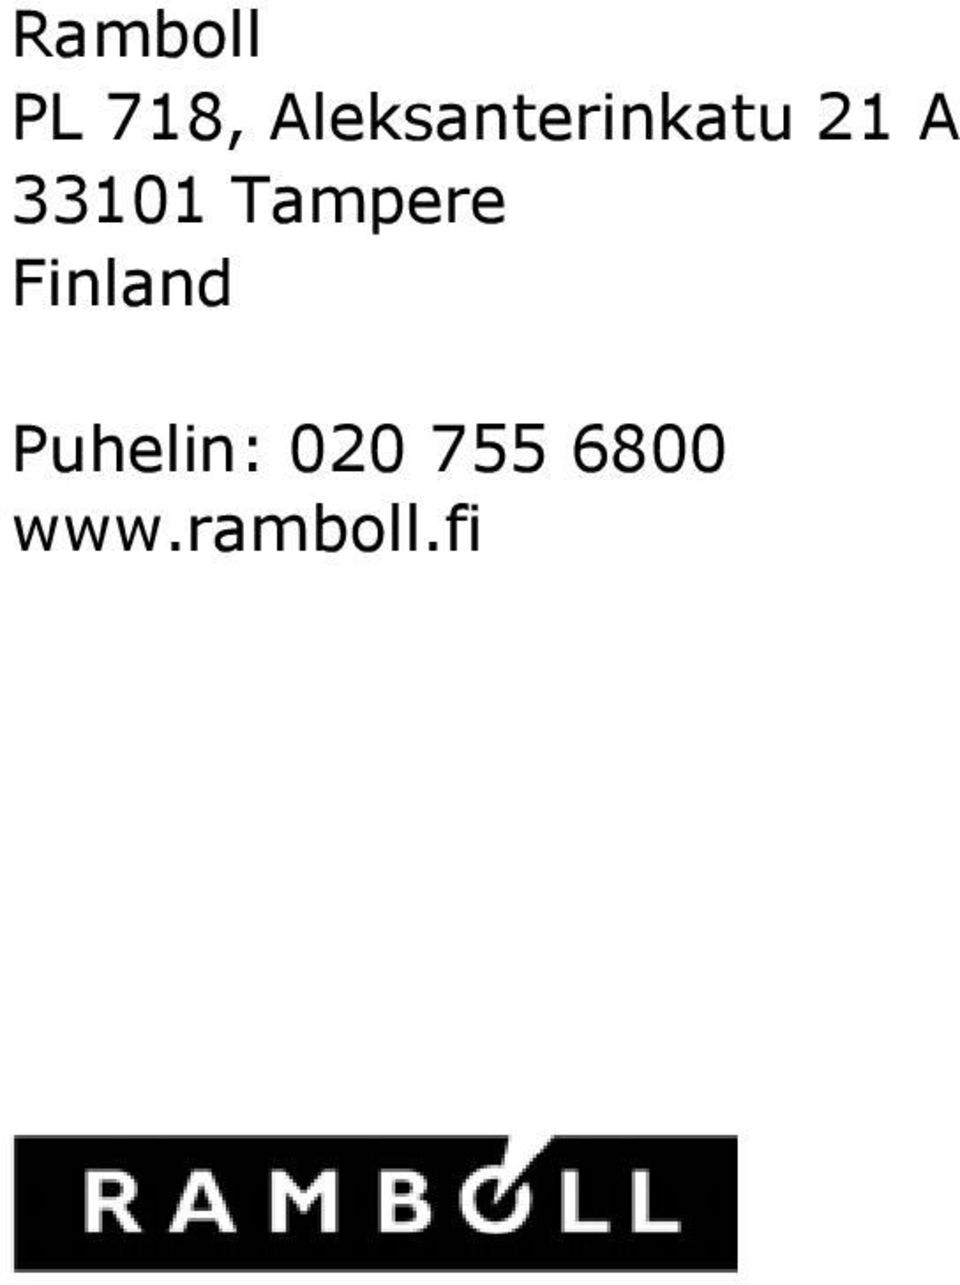 33101 Tampere Finland